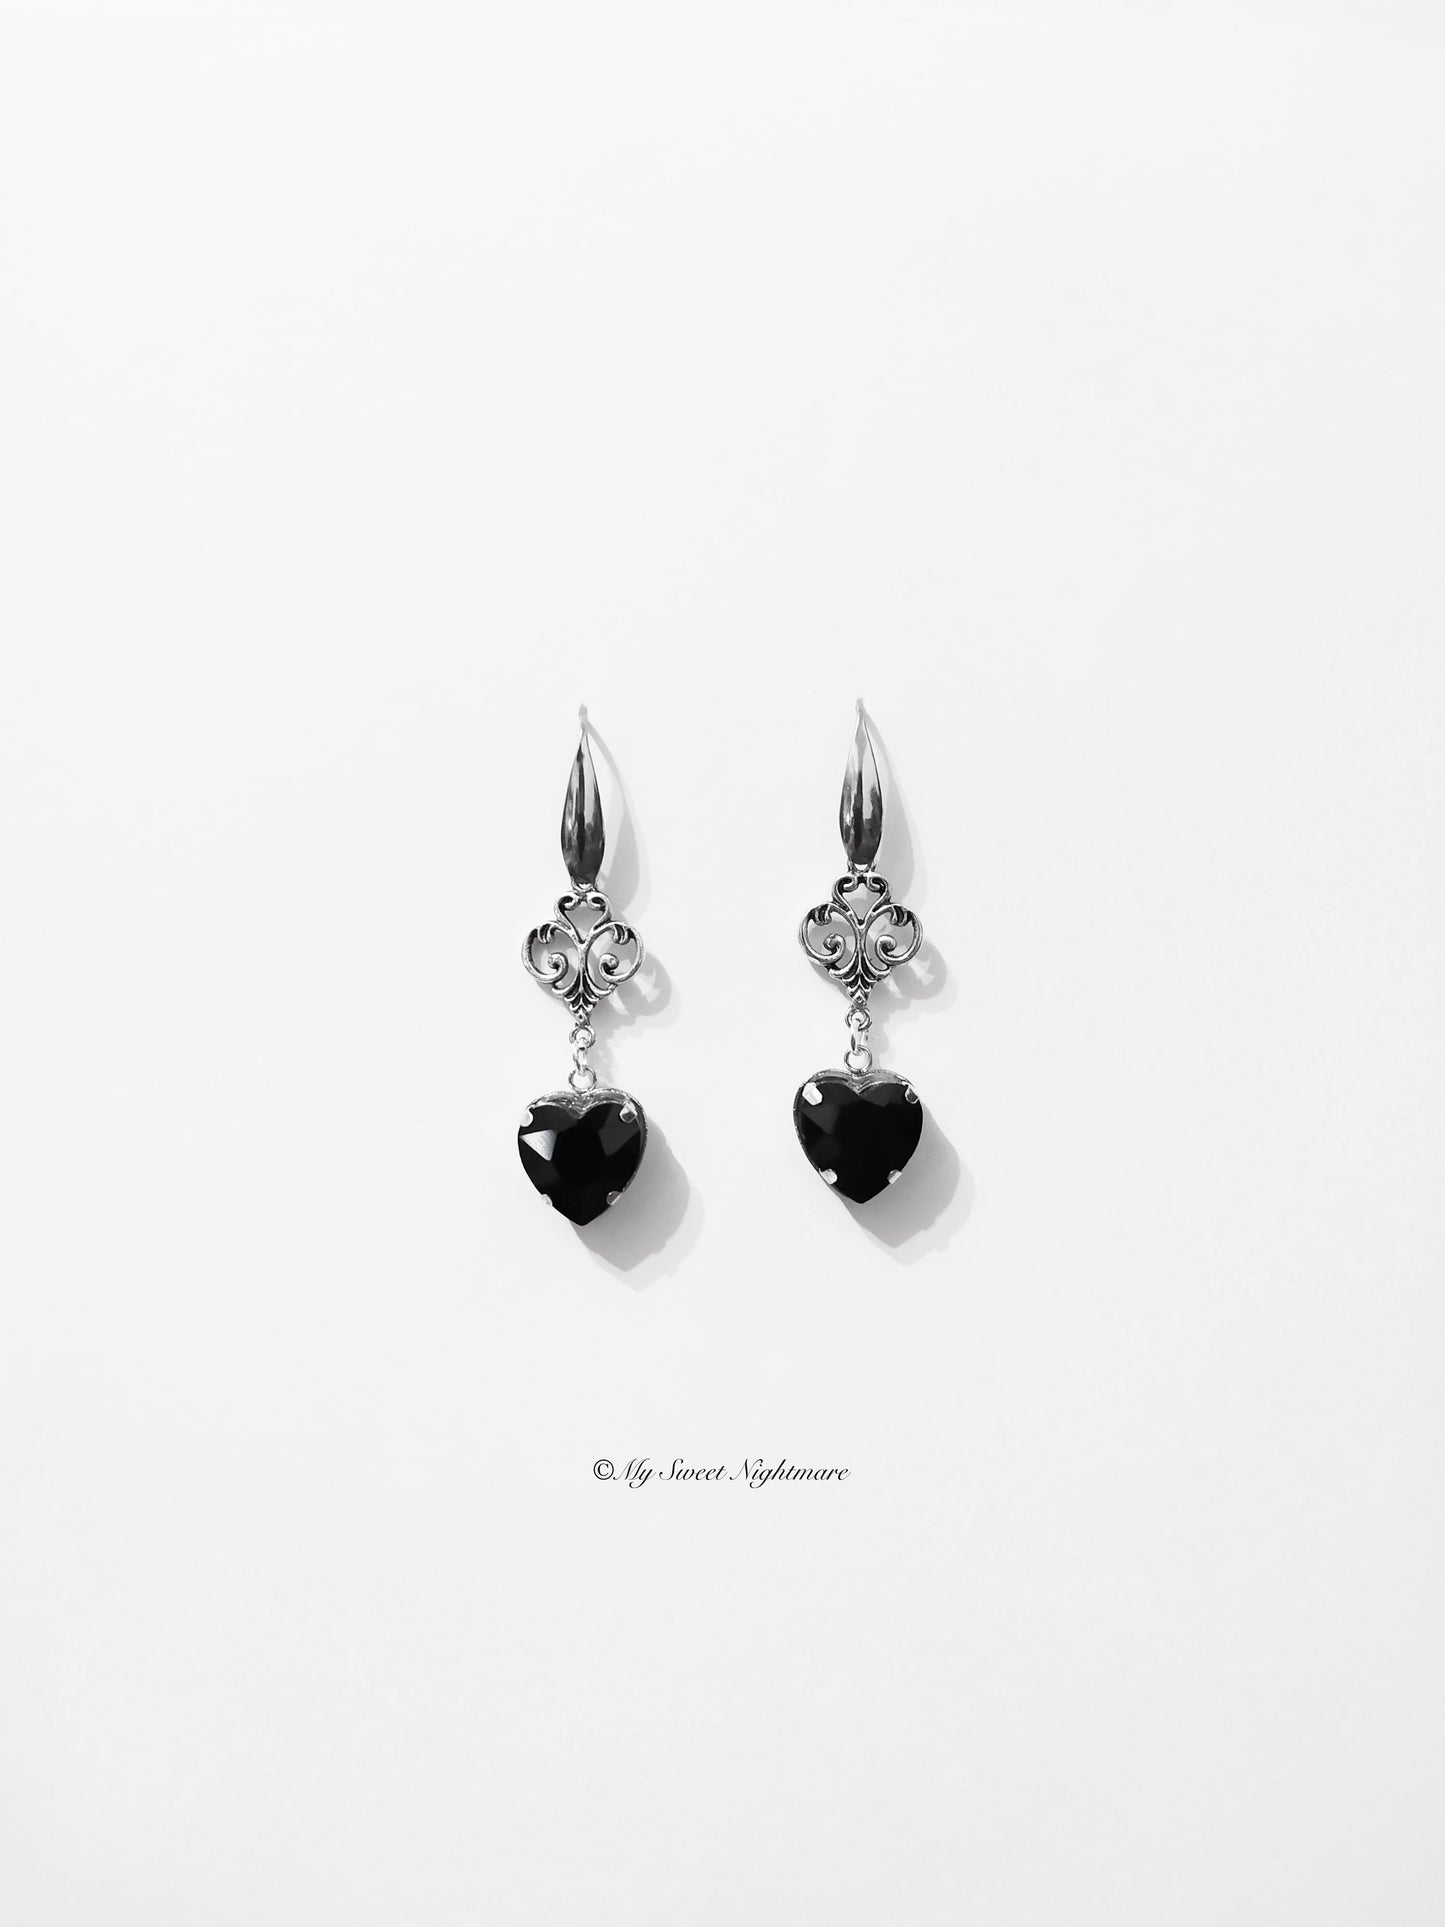 Earrings with Hearts in Black Crystal